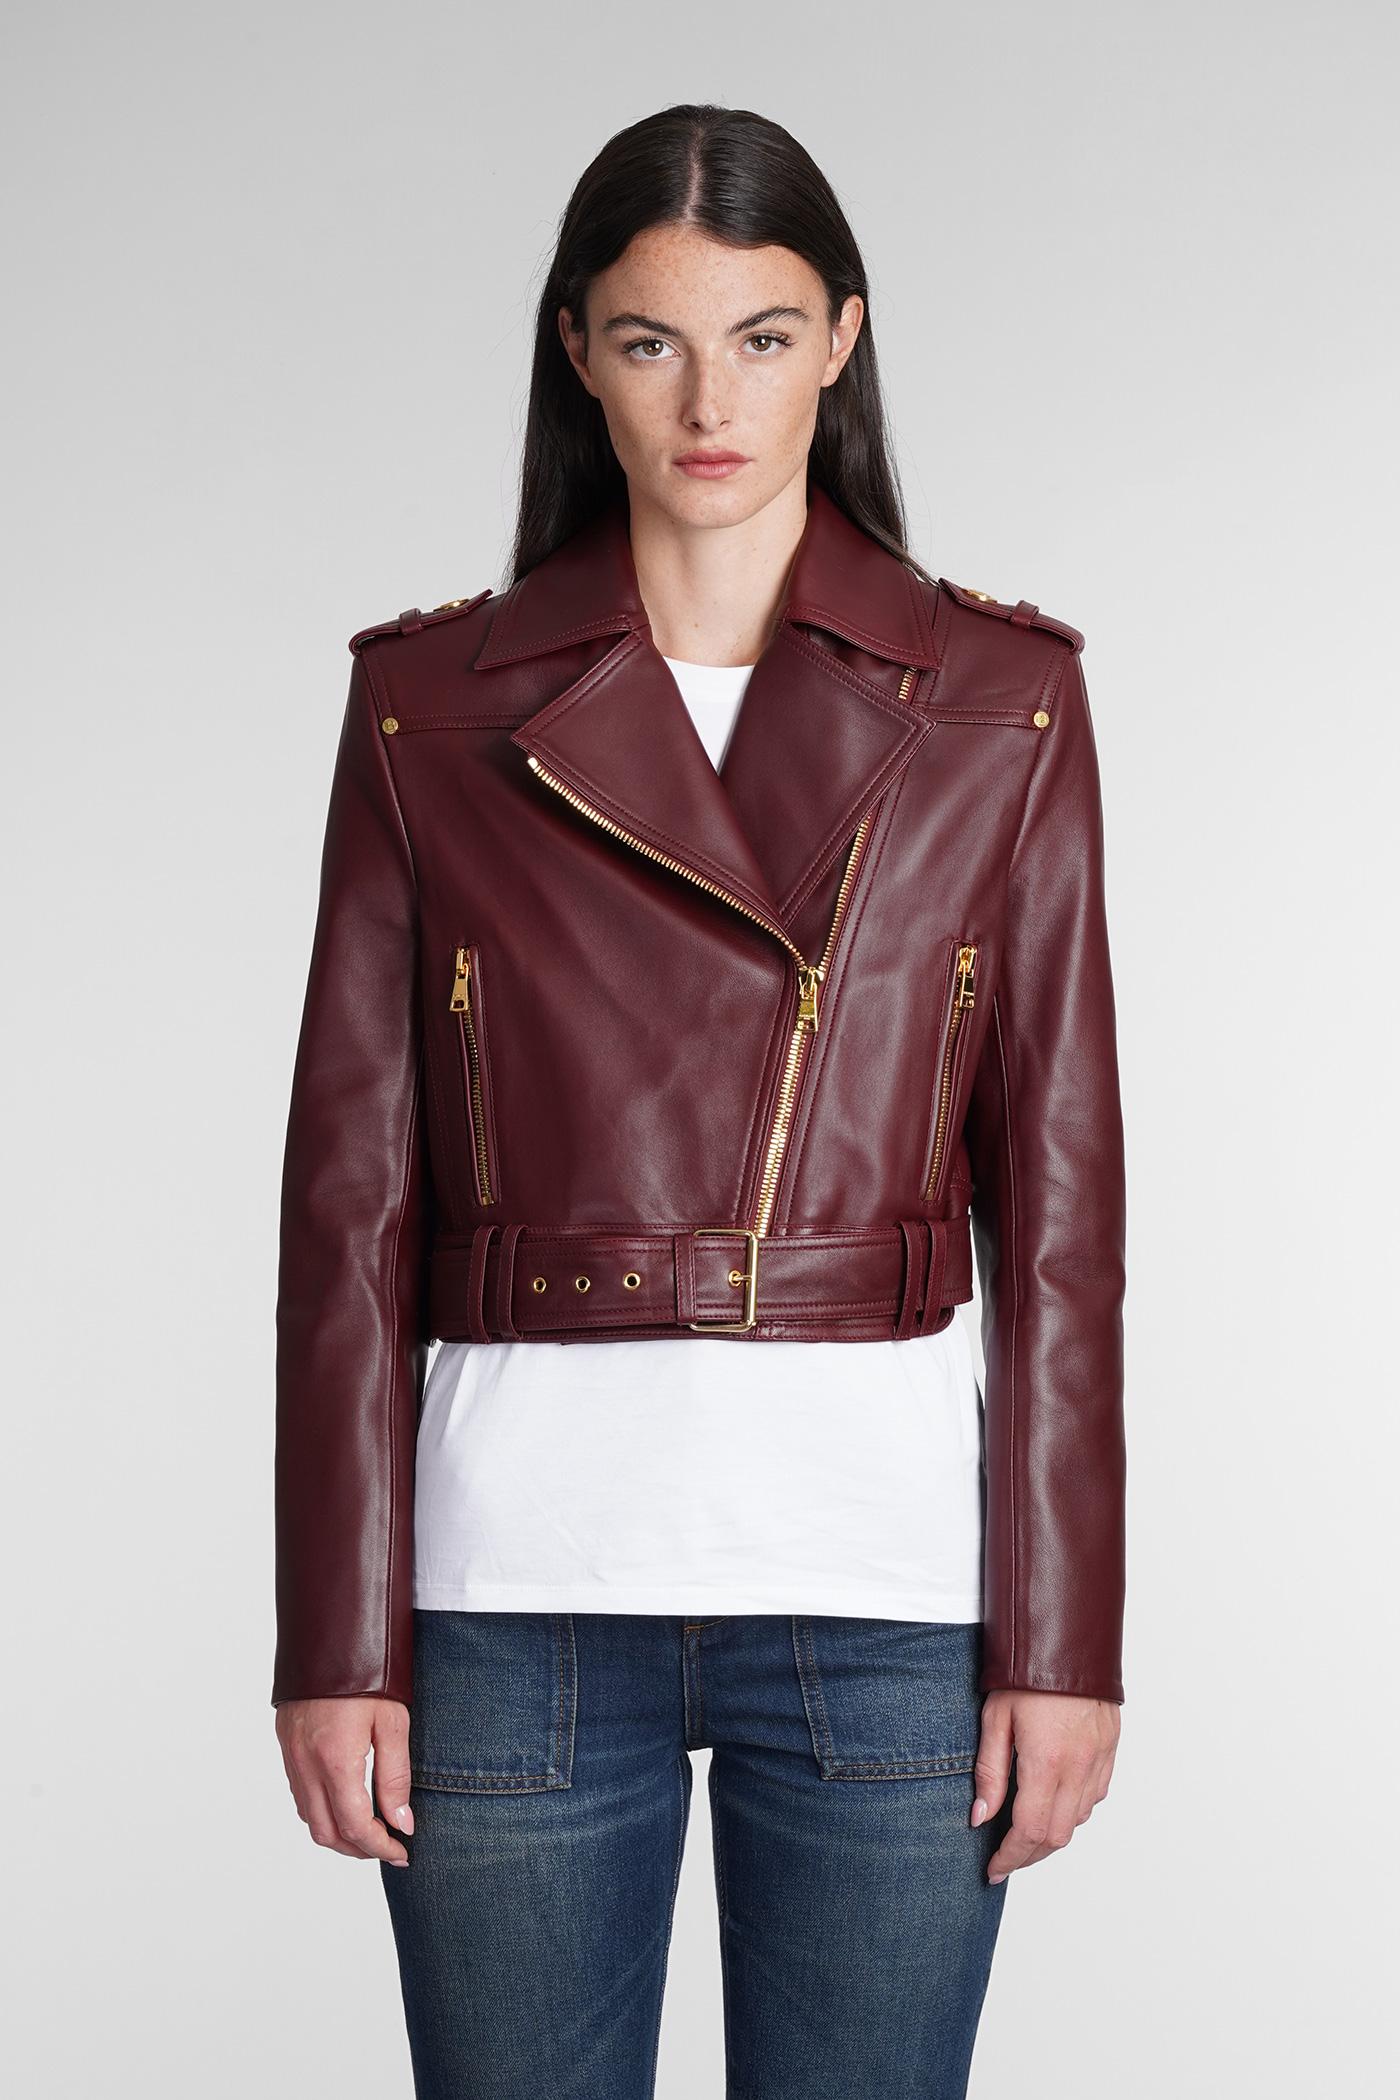 Balmain Leather Jacket In Bordeaux Leather in Red | Lyst